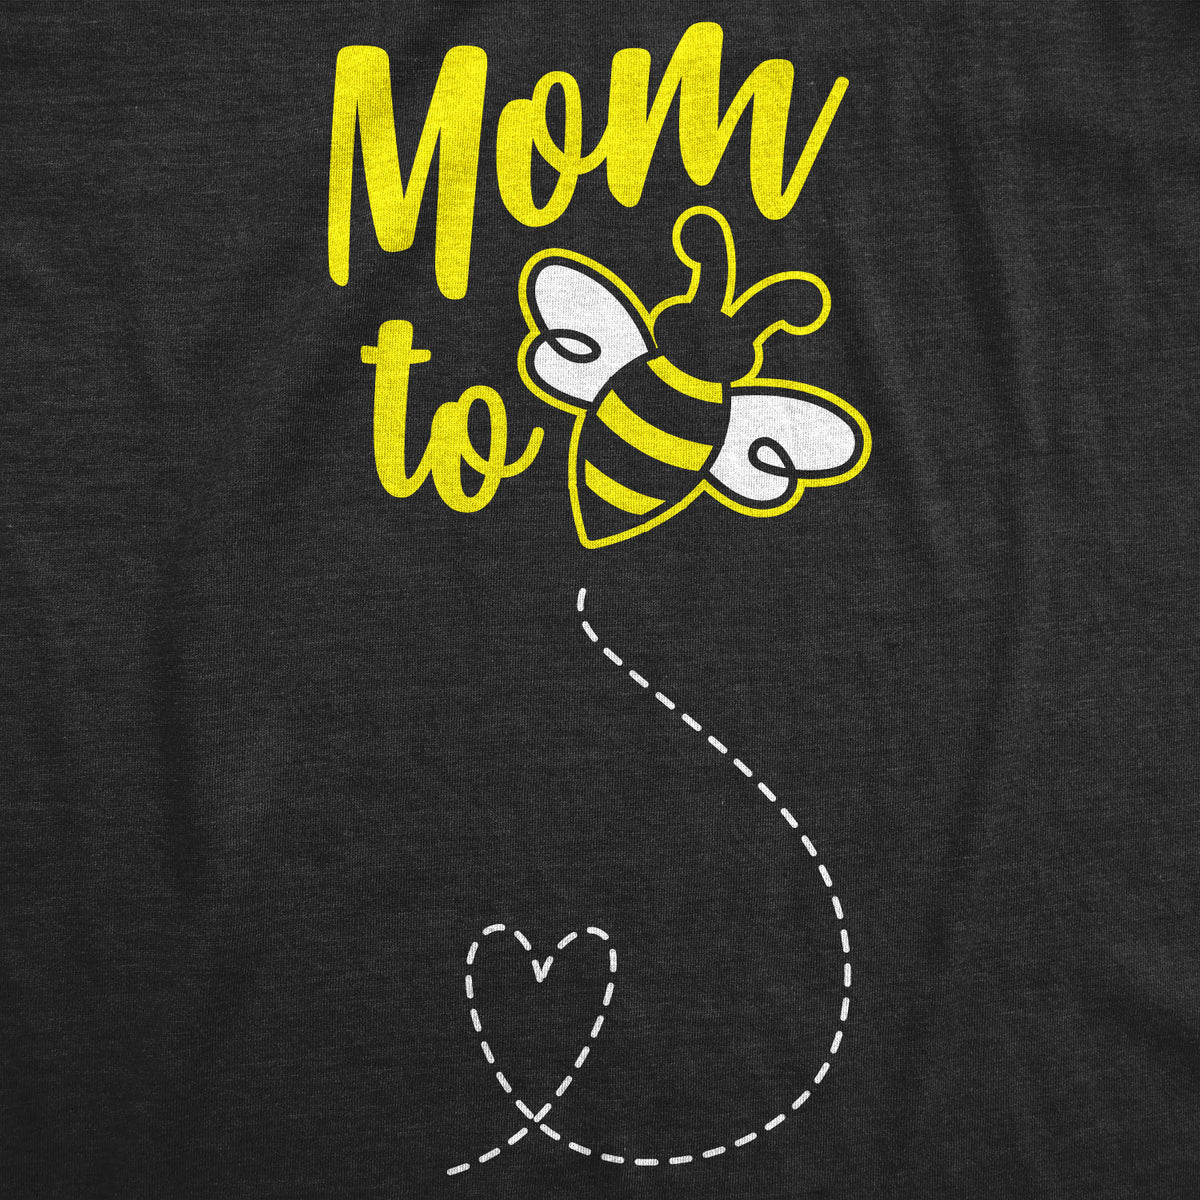 Mom To Bee Maternity T Shirt